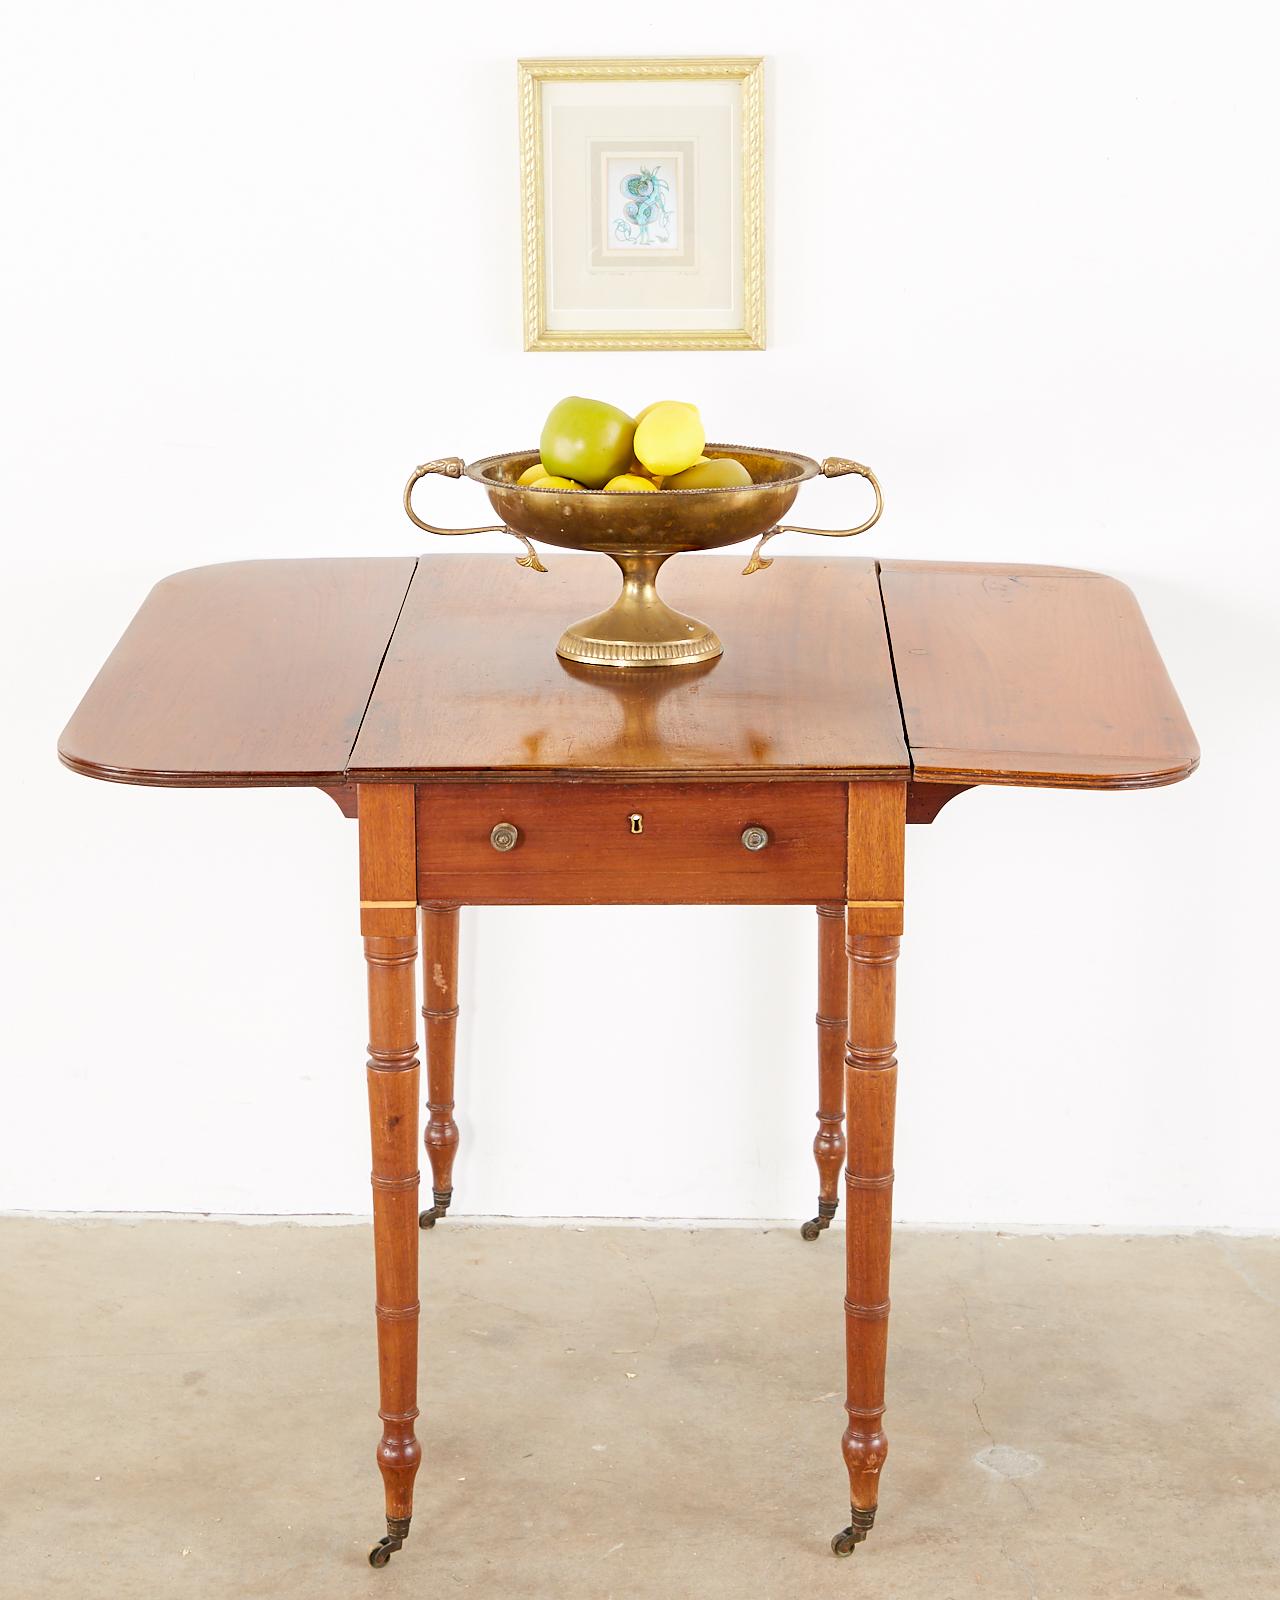 Unique 19th century English Pembroke drop-leaf table made in the Regency taste. Features a mahogany case supported by faux bamboo legs ending with toupie feet and casters. The table top measures 37 inches when open and has a storage drawer on one